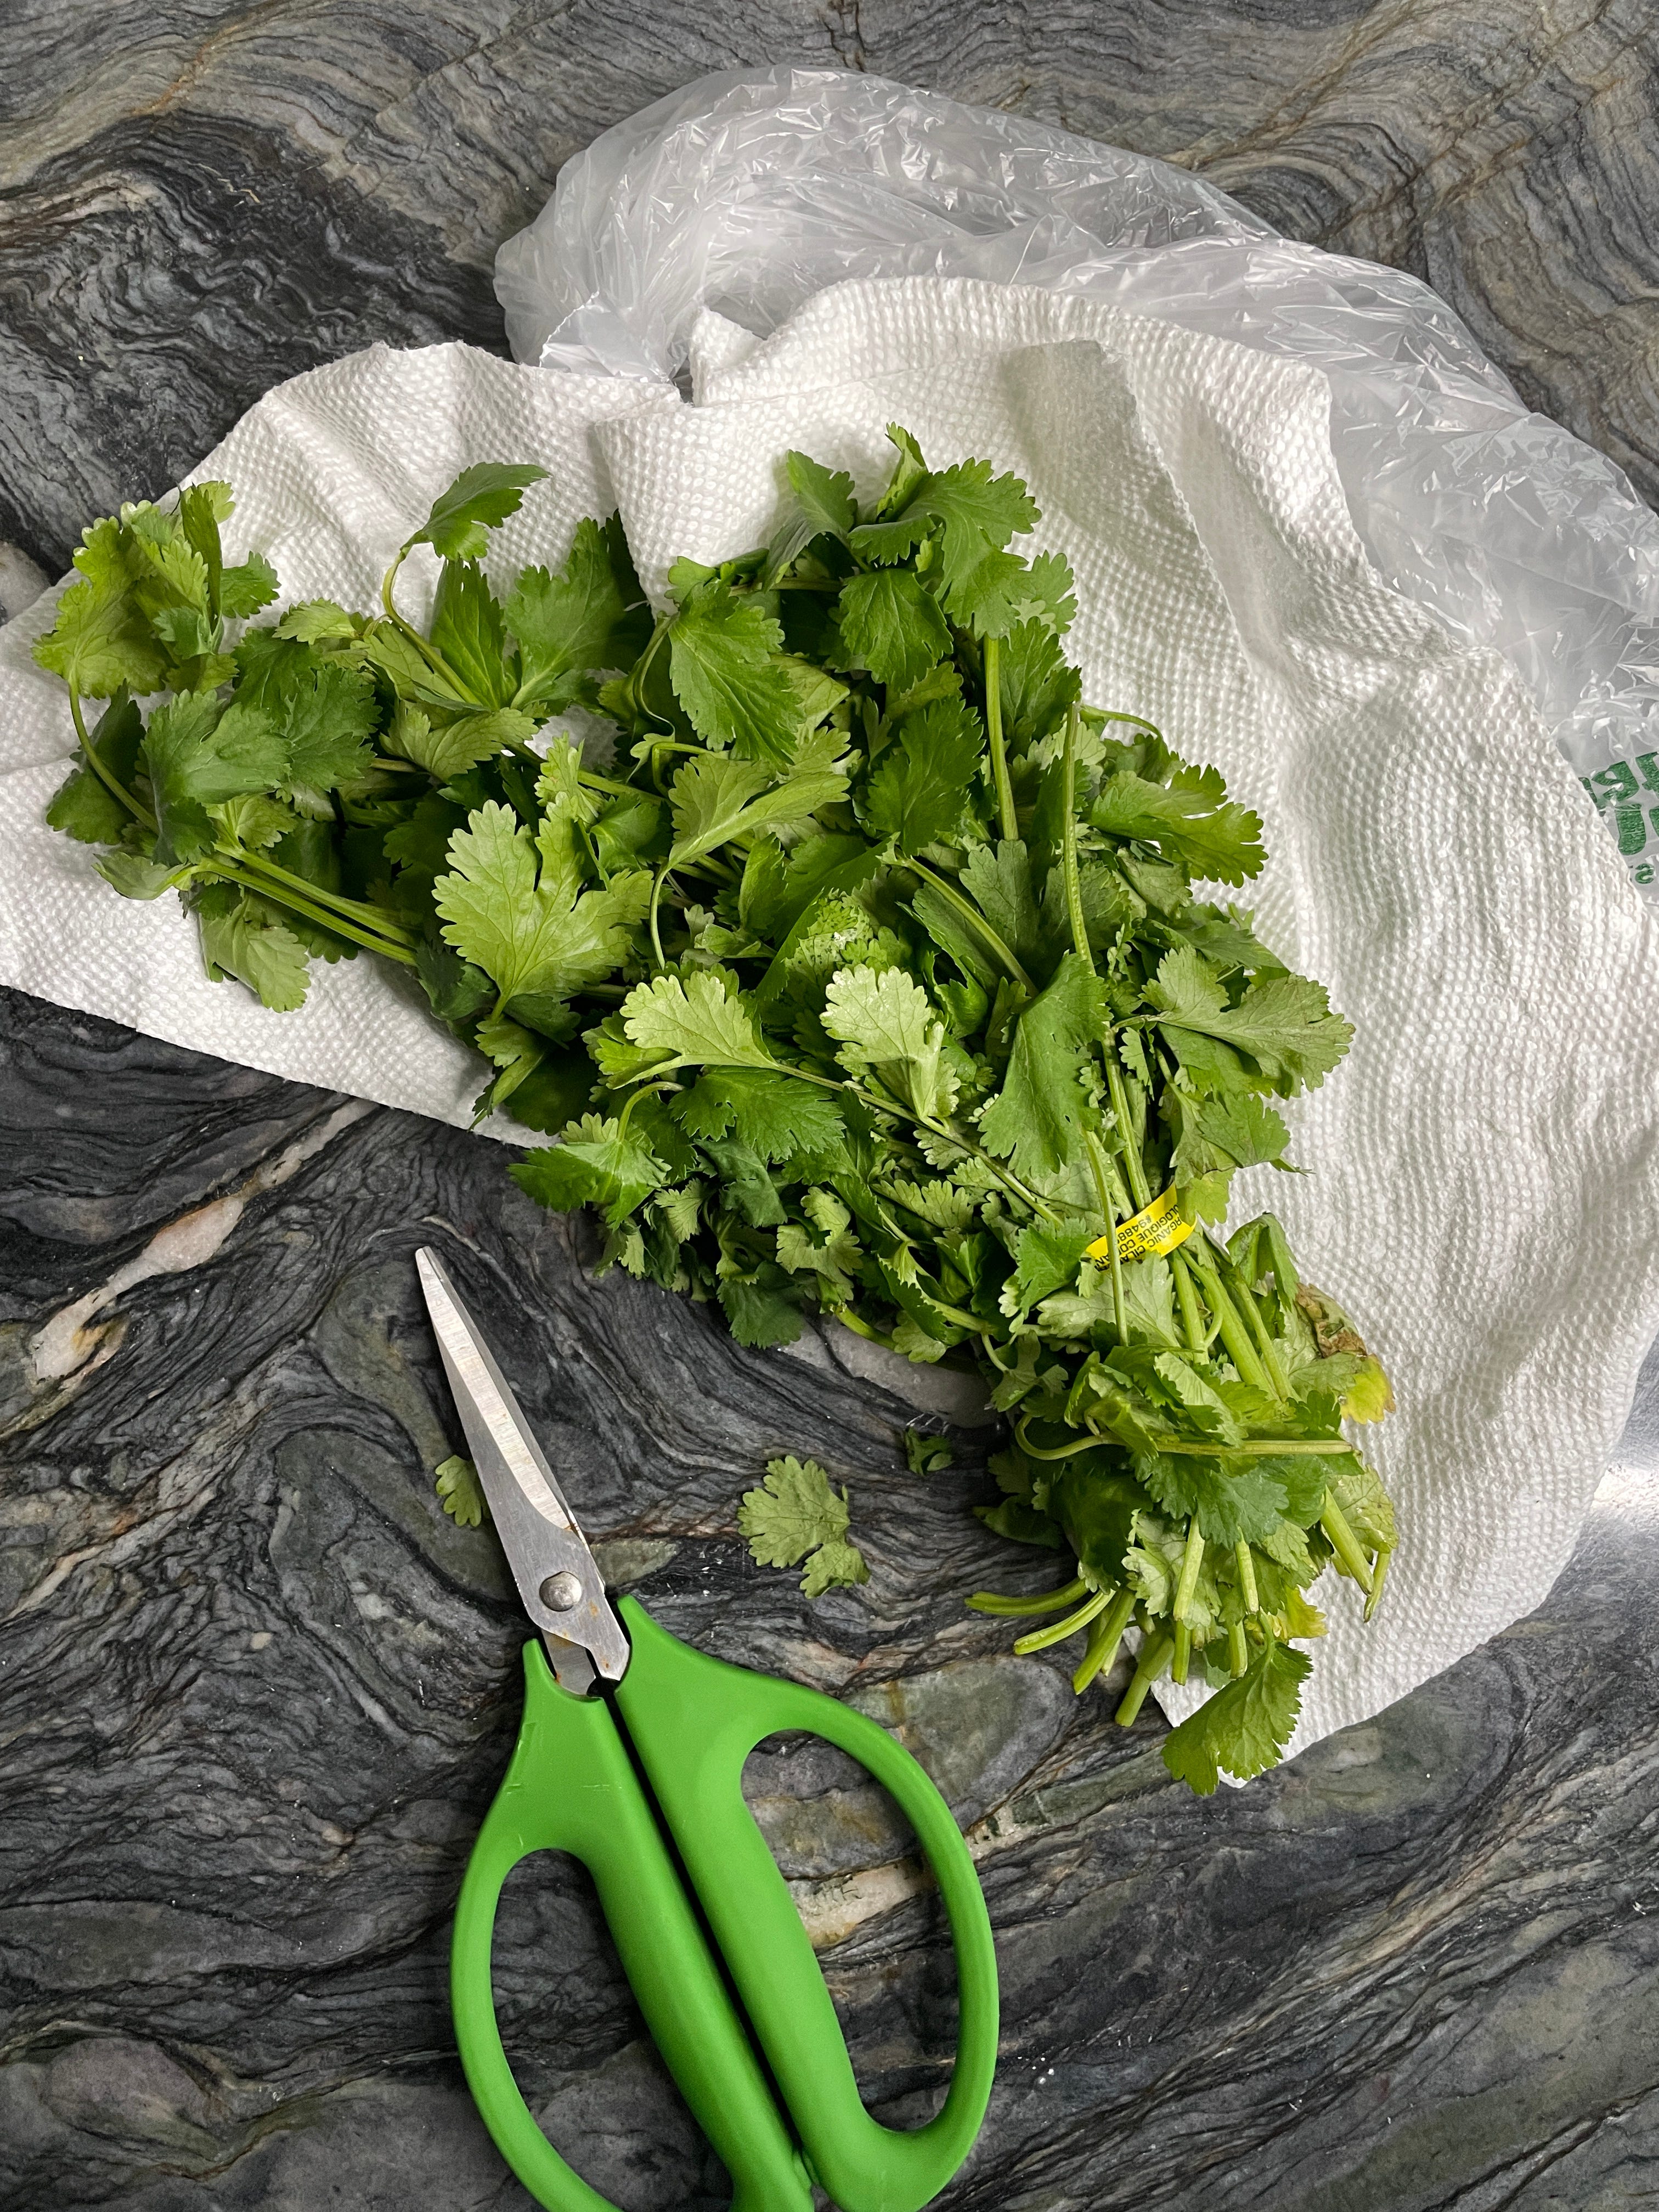 How To Use Paper Towels To Keep Produce Fresh In The Fridge